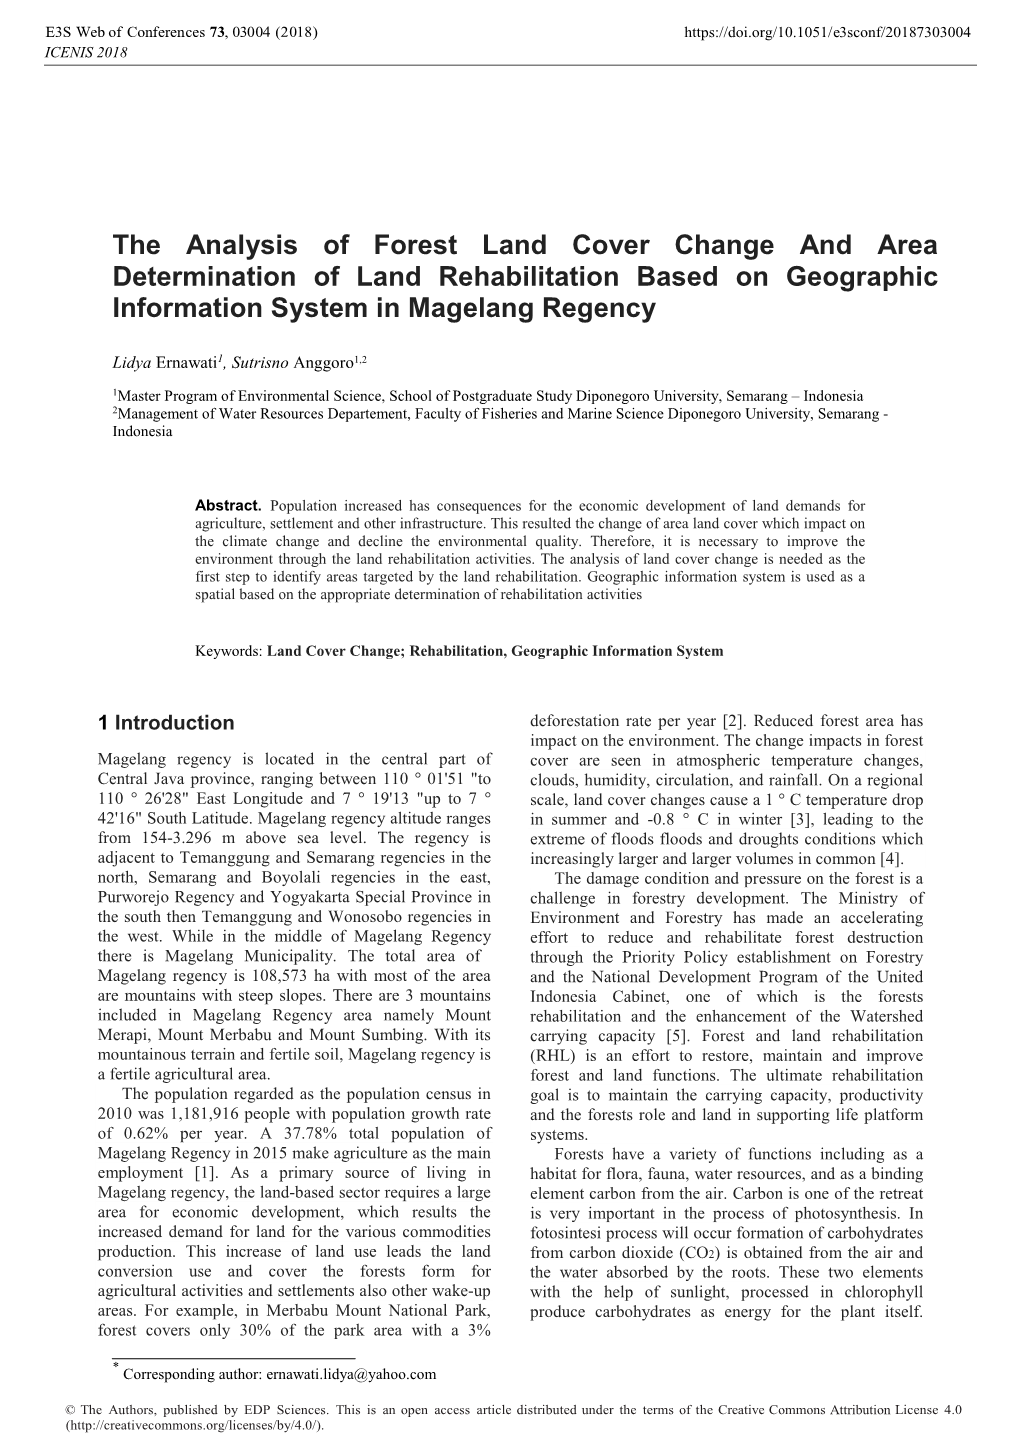 The Analysis of Forest Land Cover Change and Area Determination of Land Rehabilitation Based on Geographic Information System in Magelang Regency